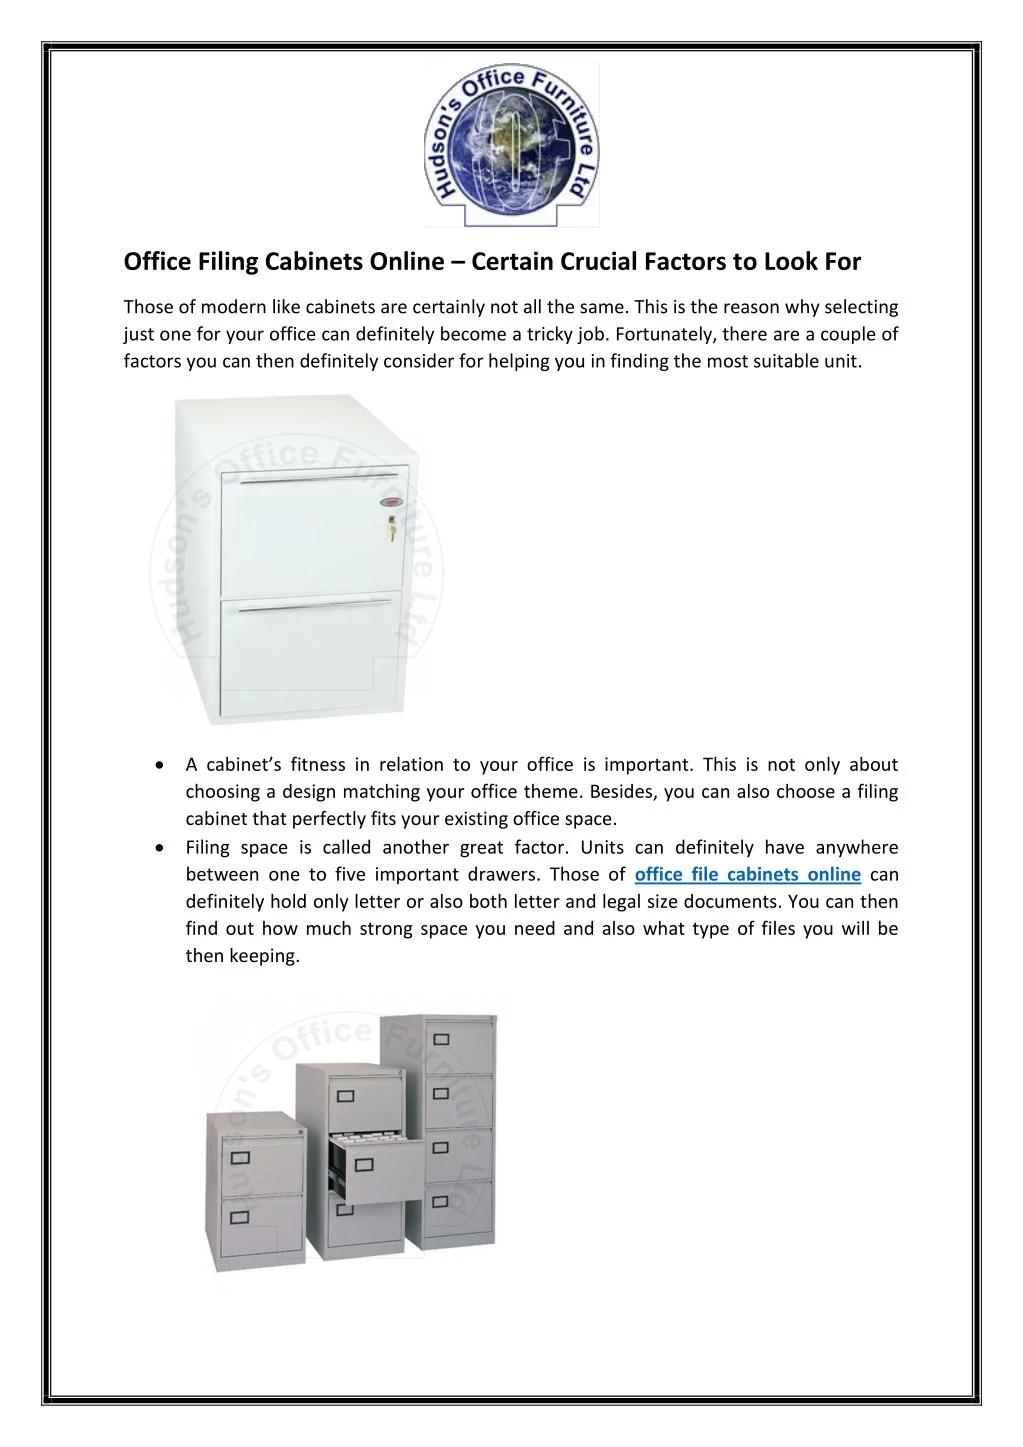 office filing cabinets online certain crucial